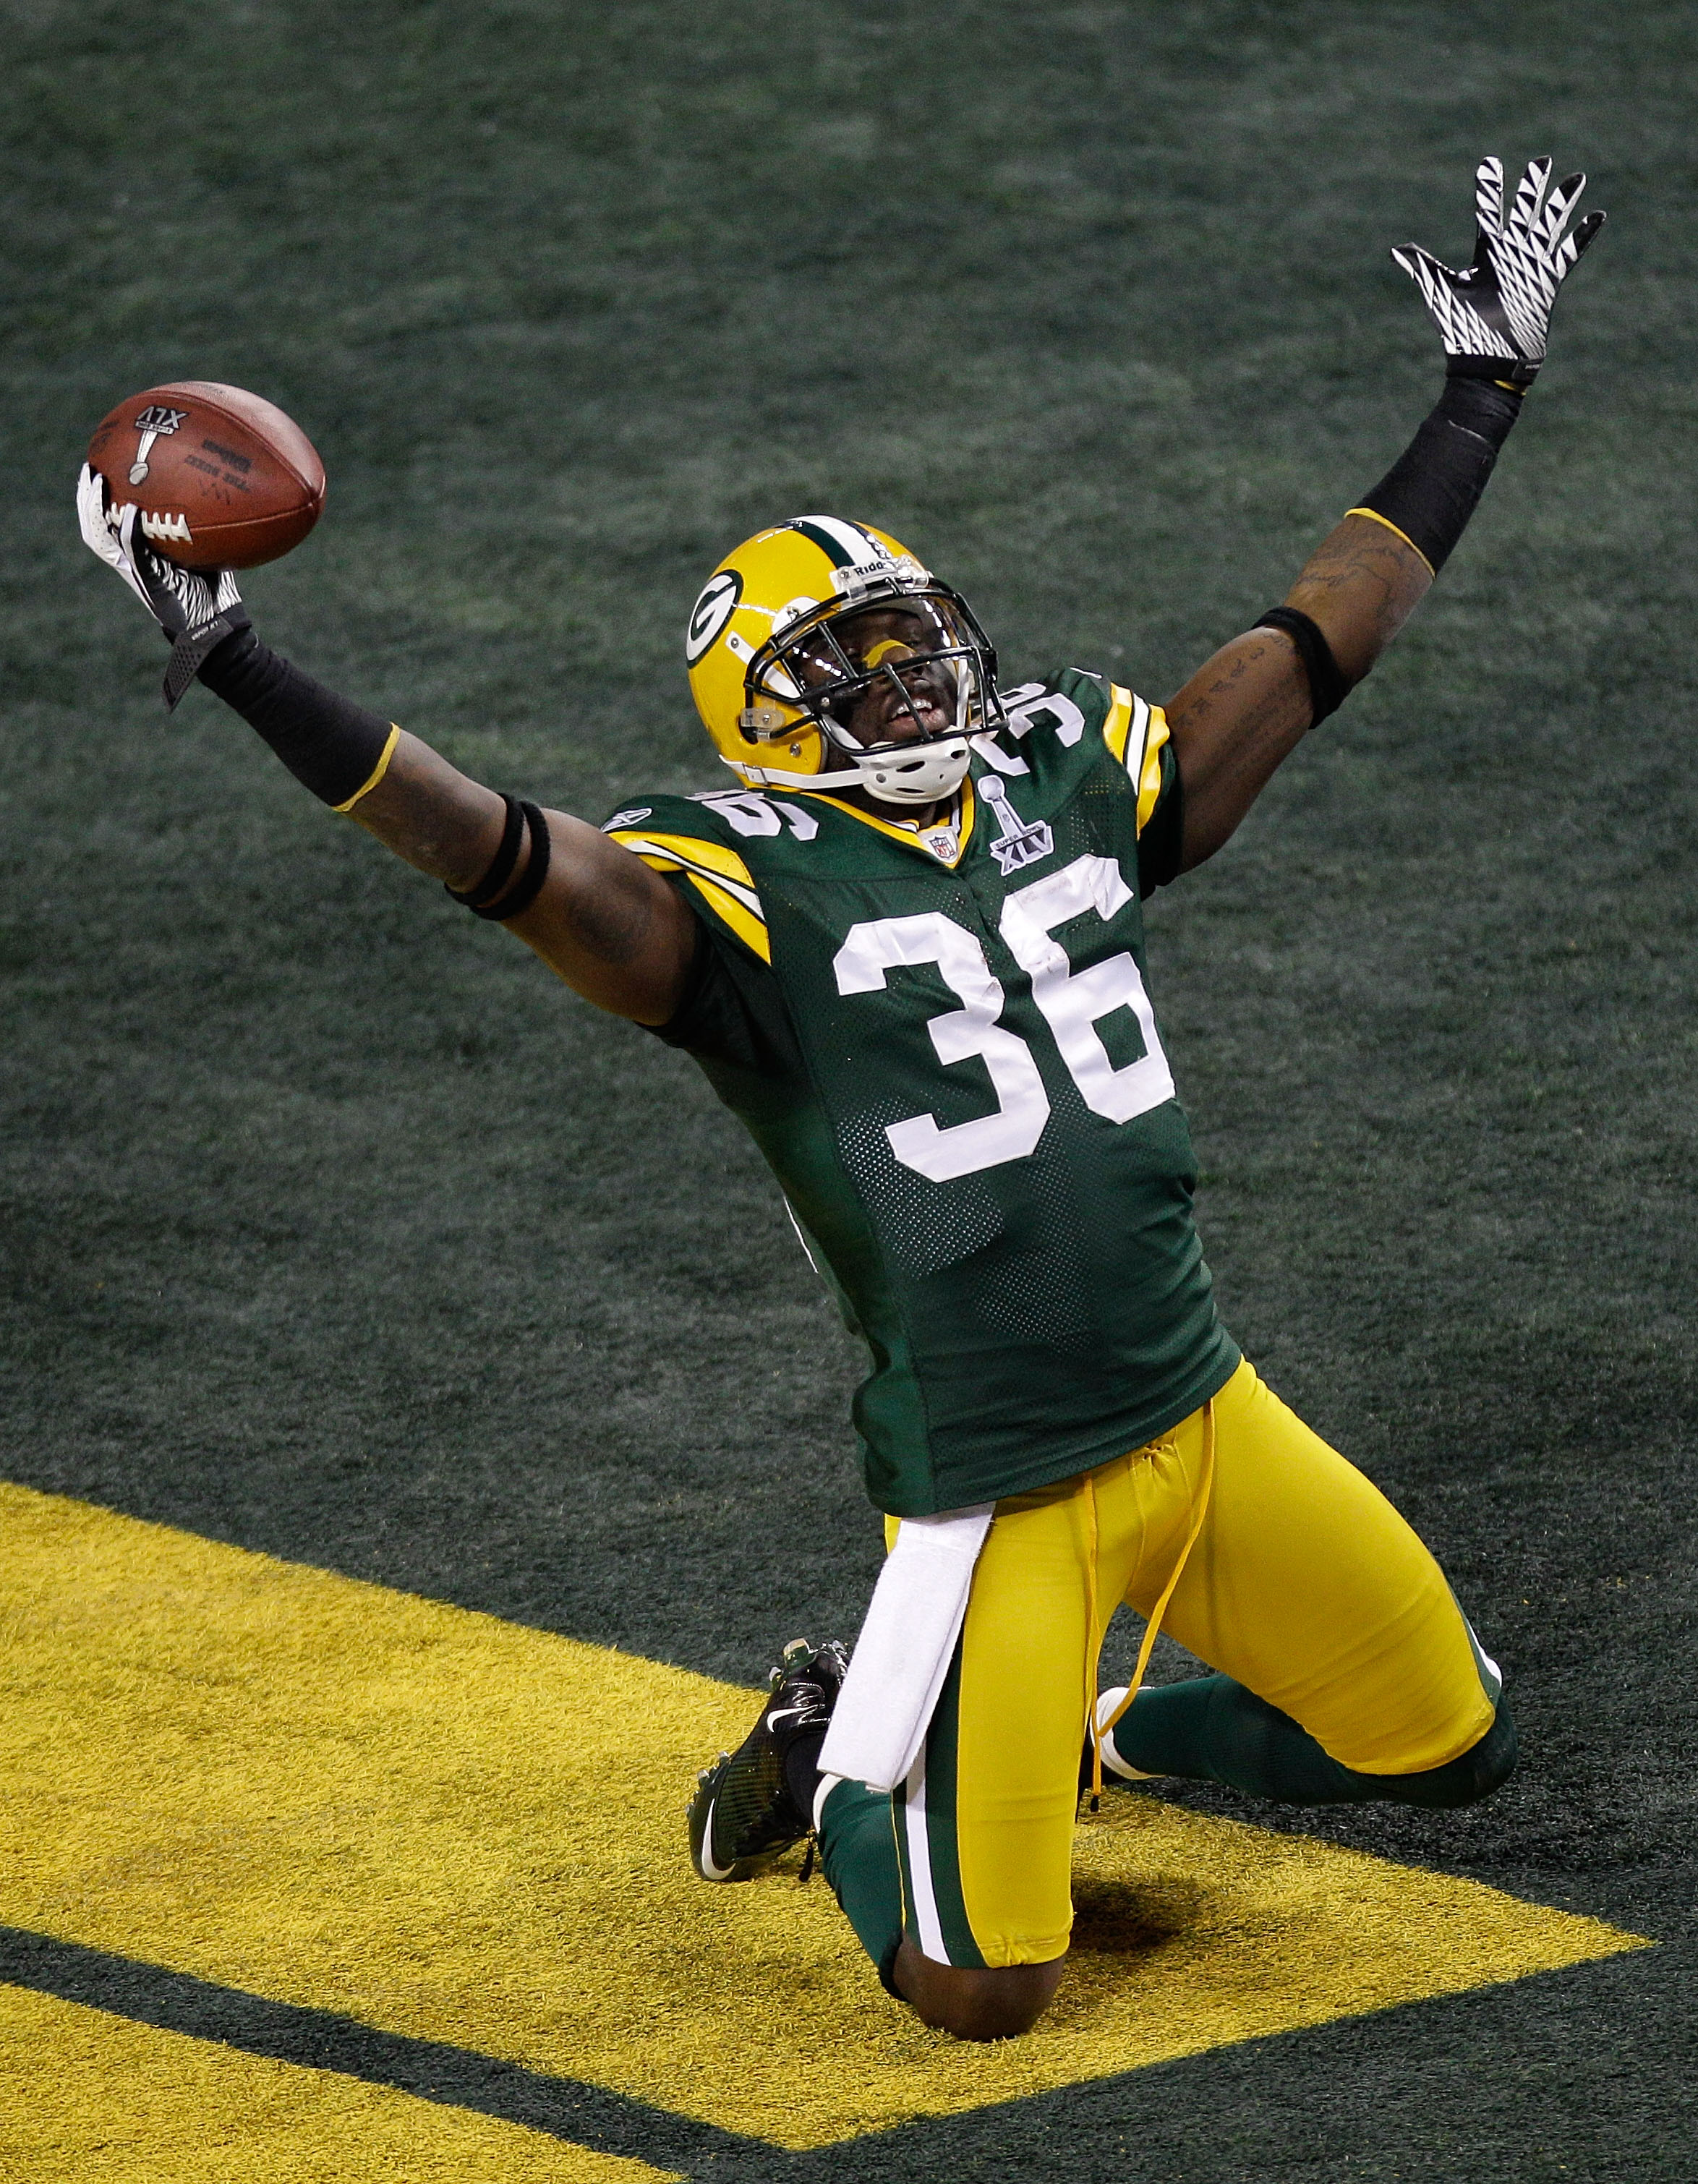 ARLINGTON, TX - FEBRUARY 06:  Nick Collins #36 of the Green Bay Packers celebrates after scoring a 37 yard touchdown on an interception in the first quarter against the Pittsburgh Steelers during Super Bowl XLV at Cowboys Stadium on February 6, 2011 in Ar